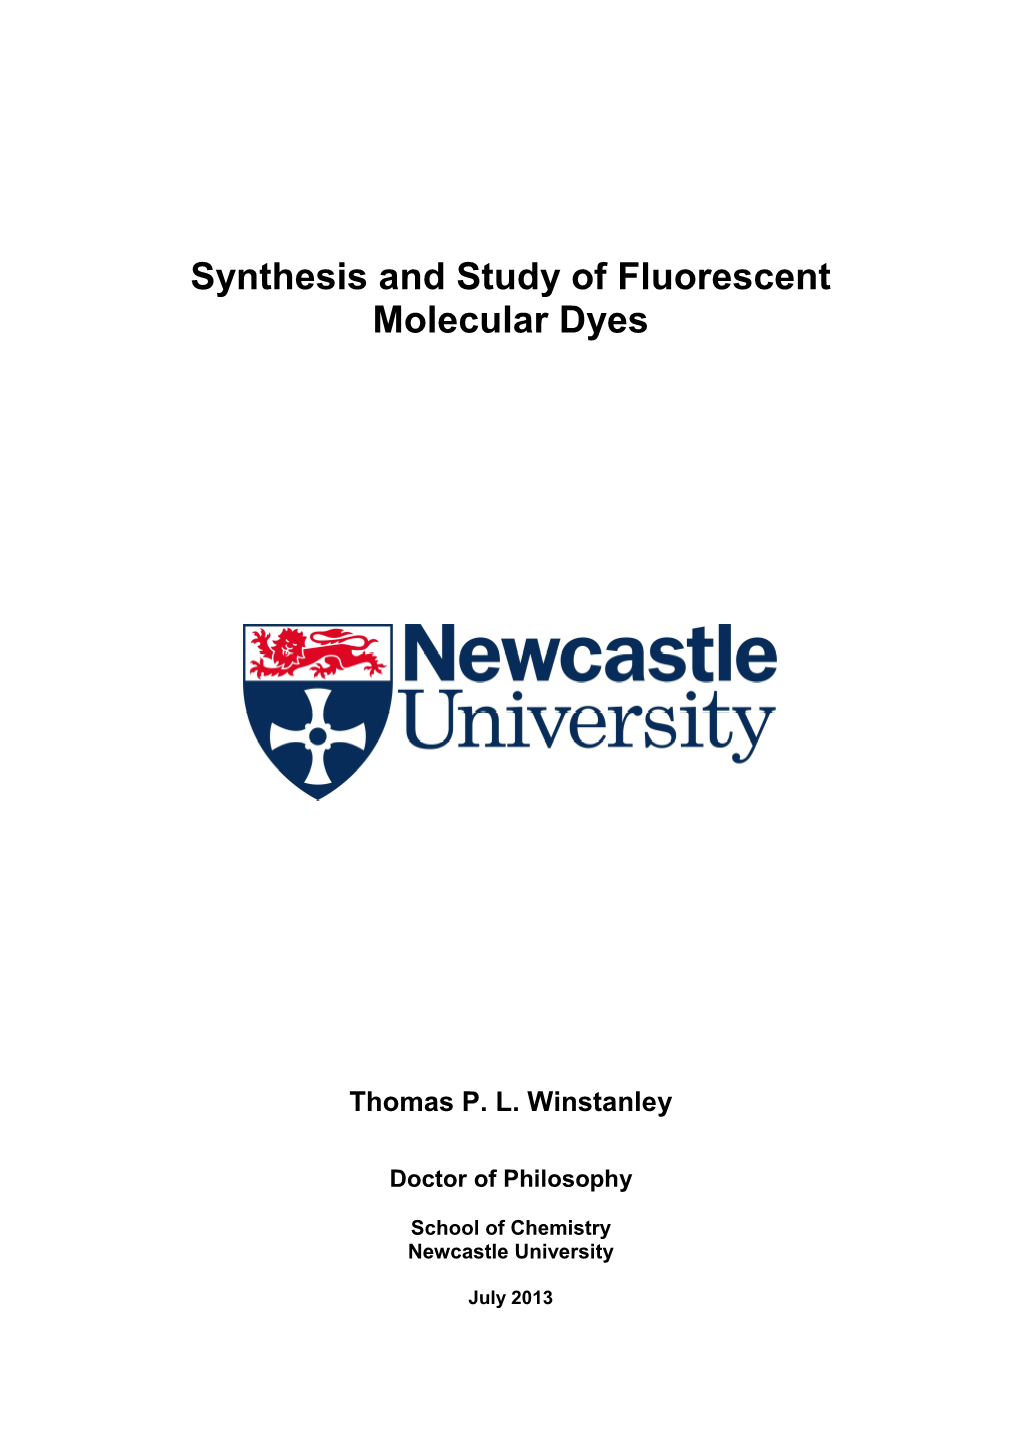 Synthesis and Study of Fluorescent Molecular Dyes